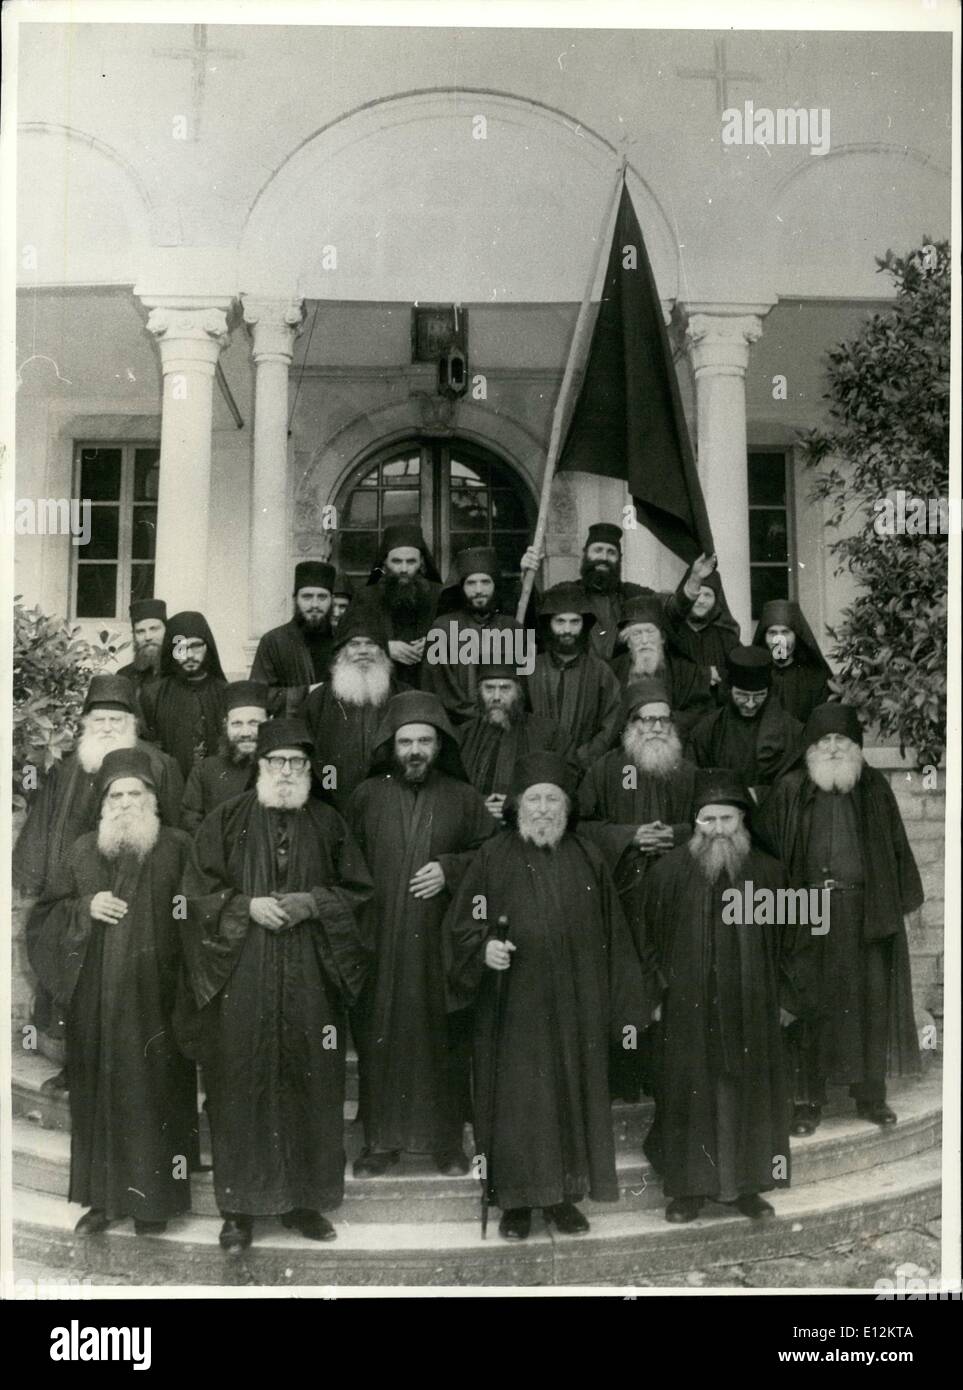 Feb. 24, 2012 - Militant Monks on Mount Athos: In the Esphigmenou monastry on Mount Athos in in the north of Greece, 40 monks are refusing to comply with the decision of the oscomenical orthodox Patriarch in Konstantionopel. These monks are known to be the reballious core of the ''Zeolots'' who stick to an extreme traditionalsm. It actually all started in 1924 when the autonomous Greek orthodox church decided to conform to the Gregorian calendar, like the rest of the Christian western world and abandoned the Julian calendar Stock Photo